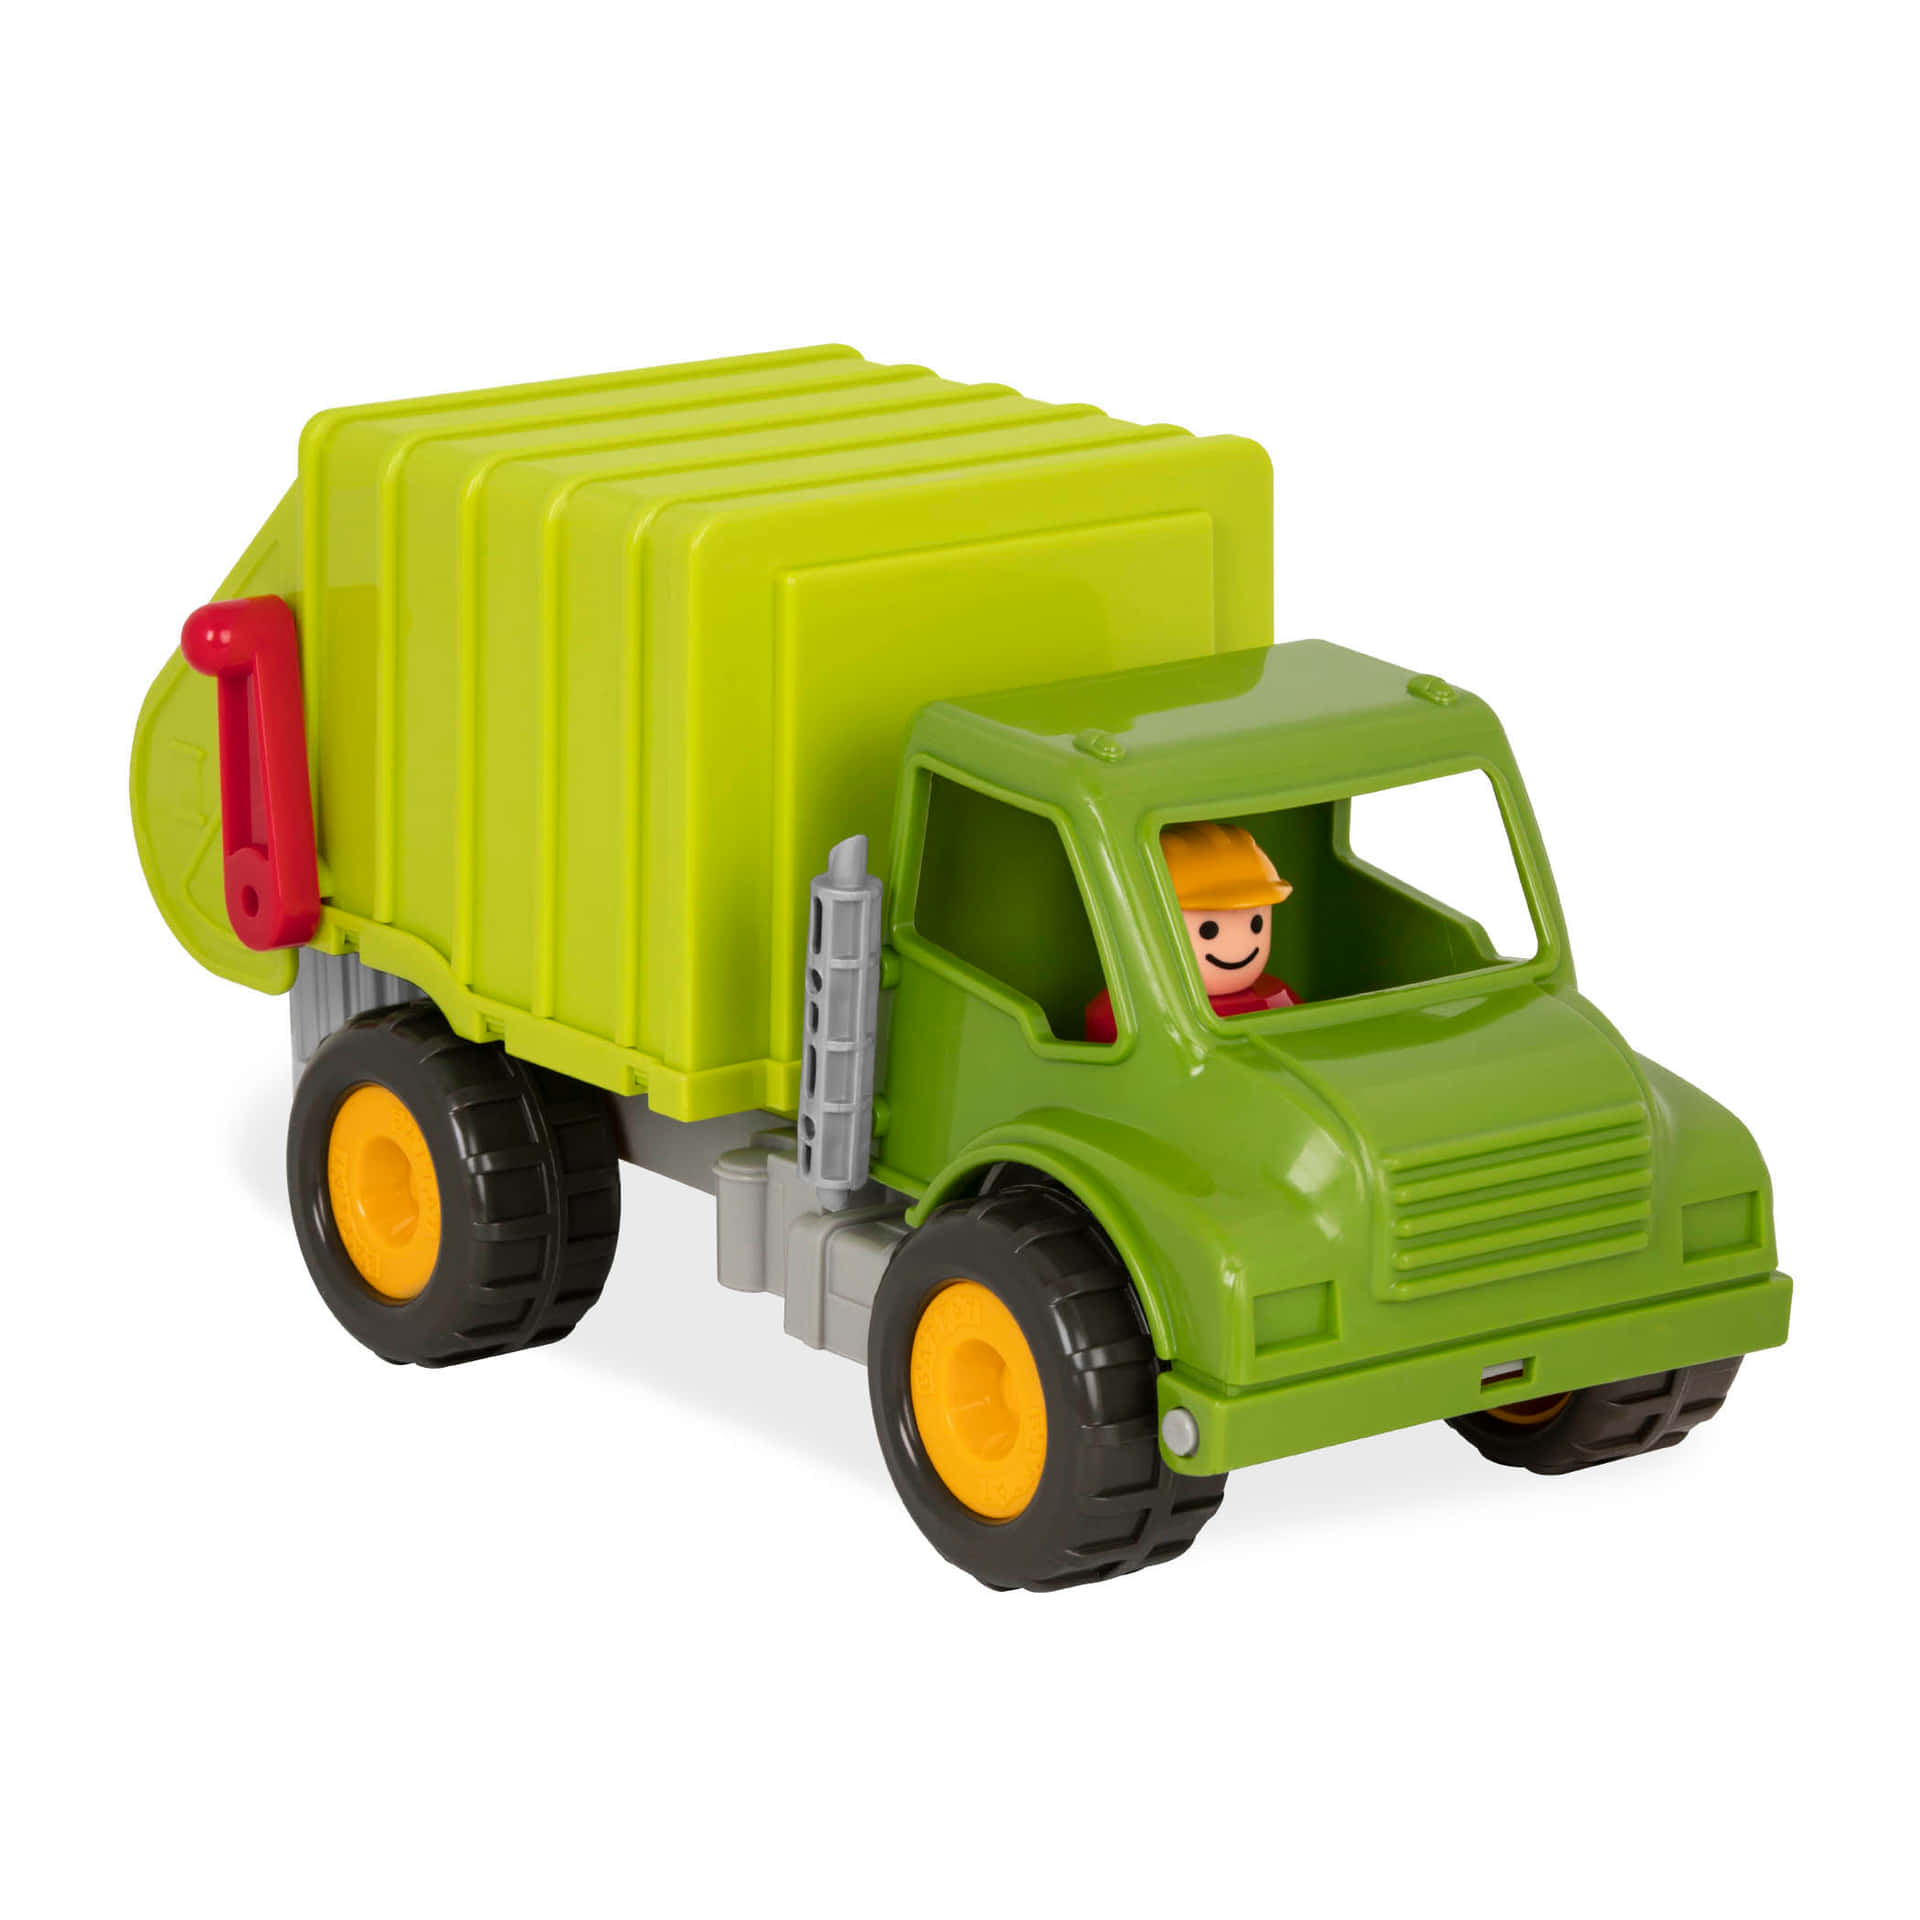 A Green Toy Truck With A Man Driving It